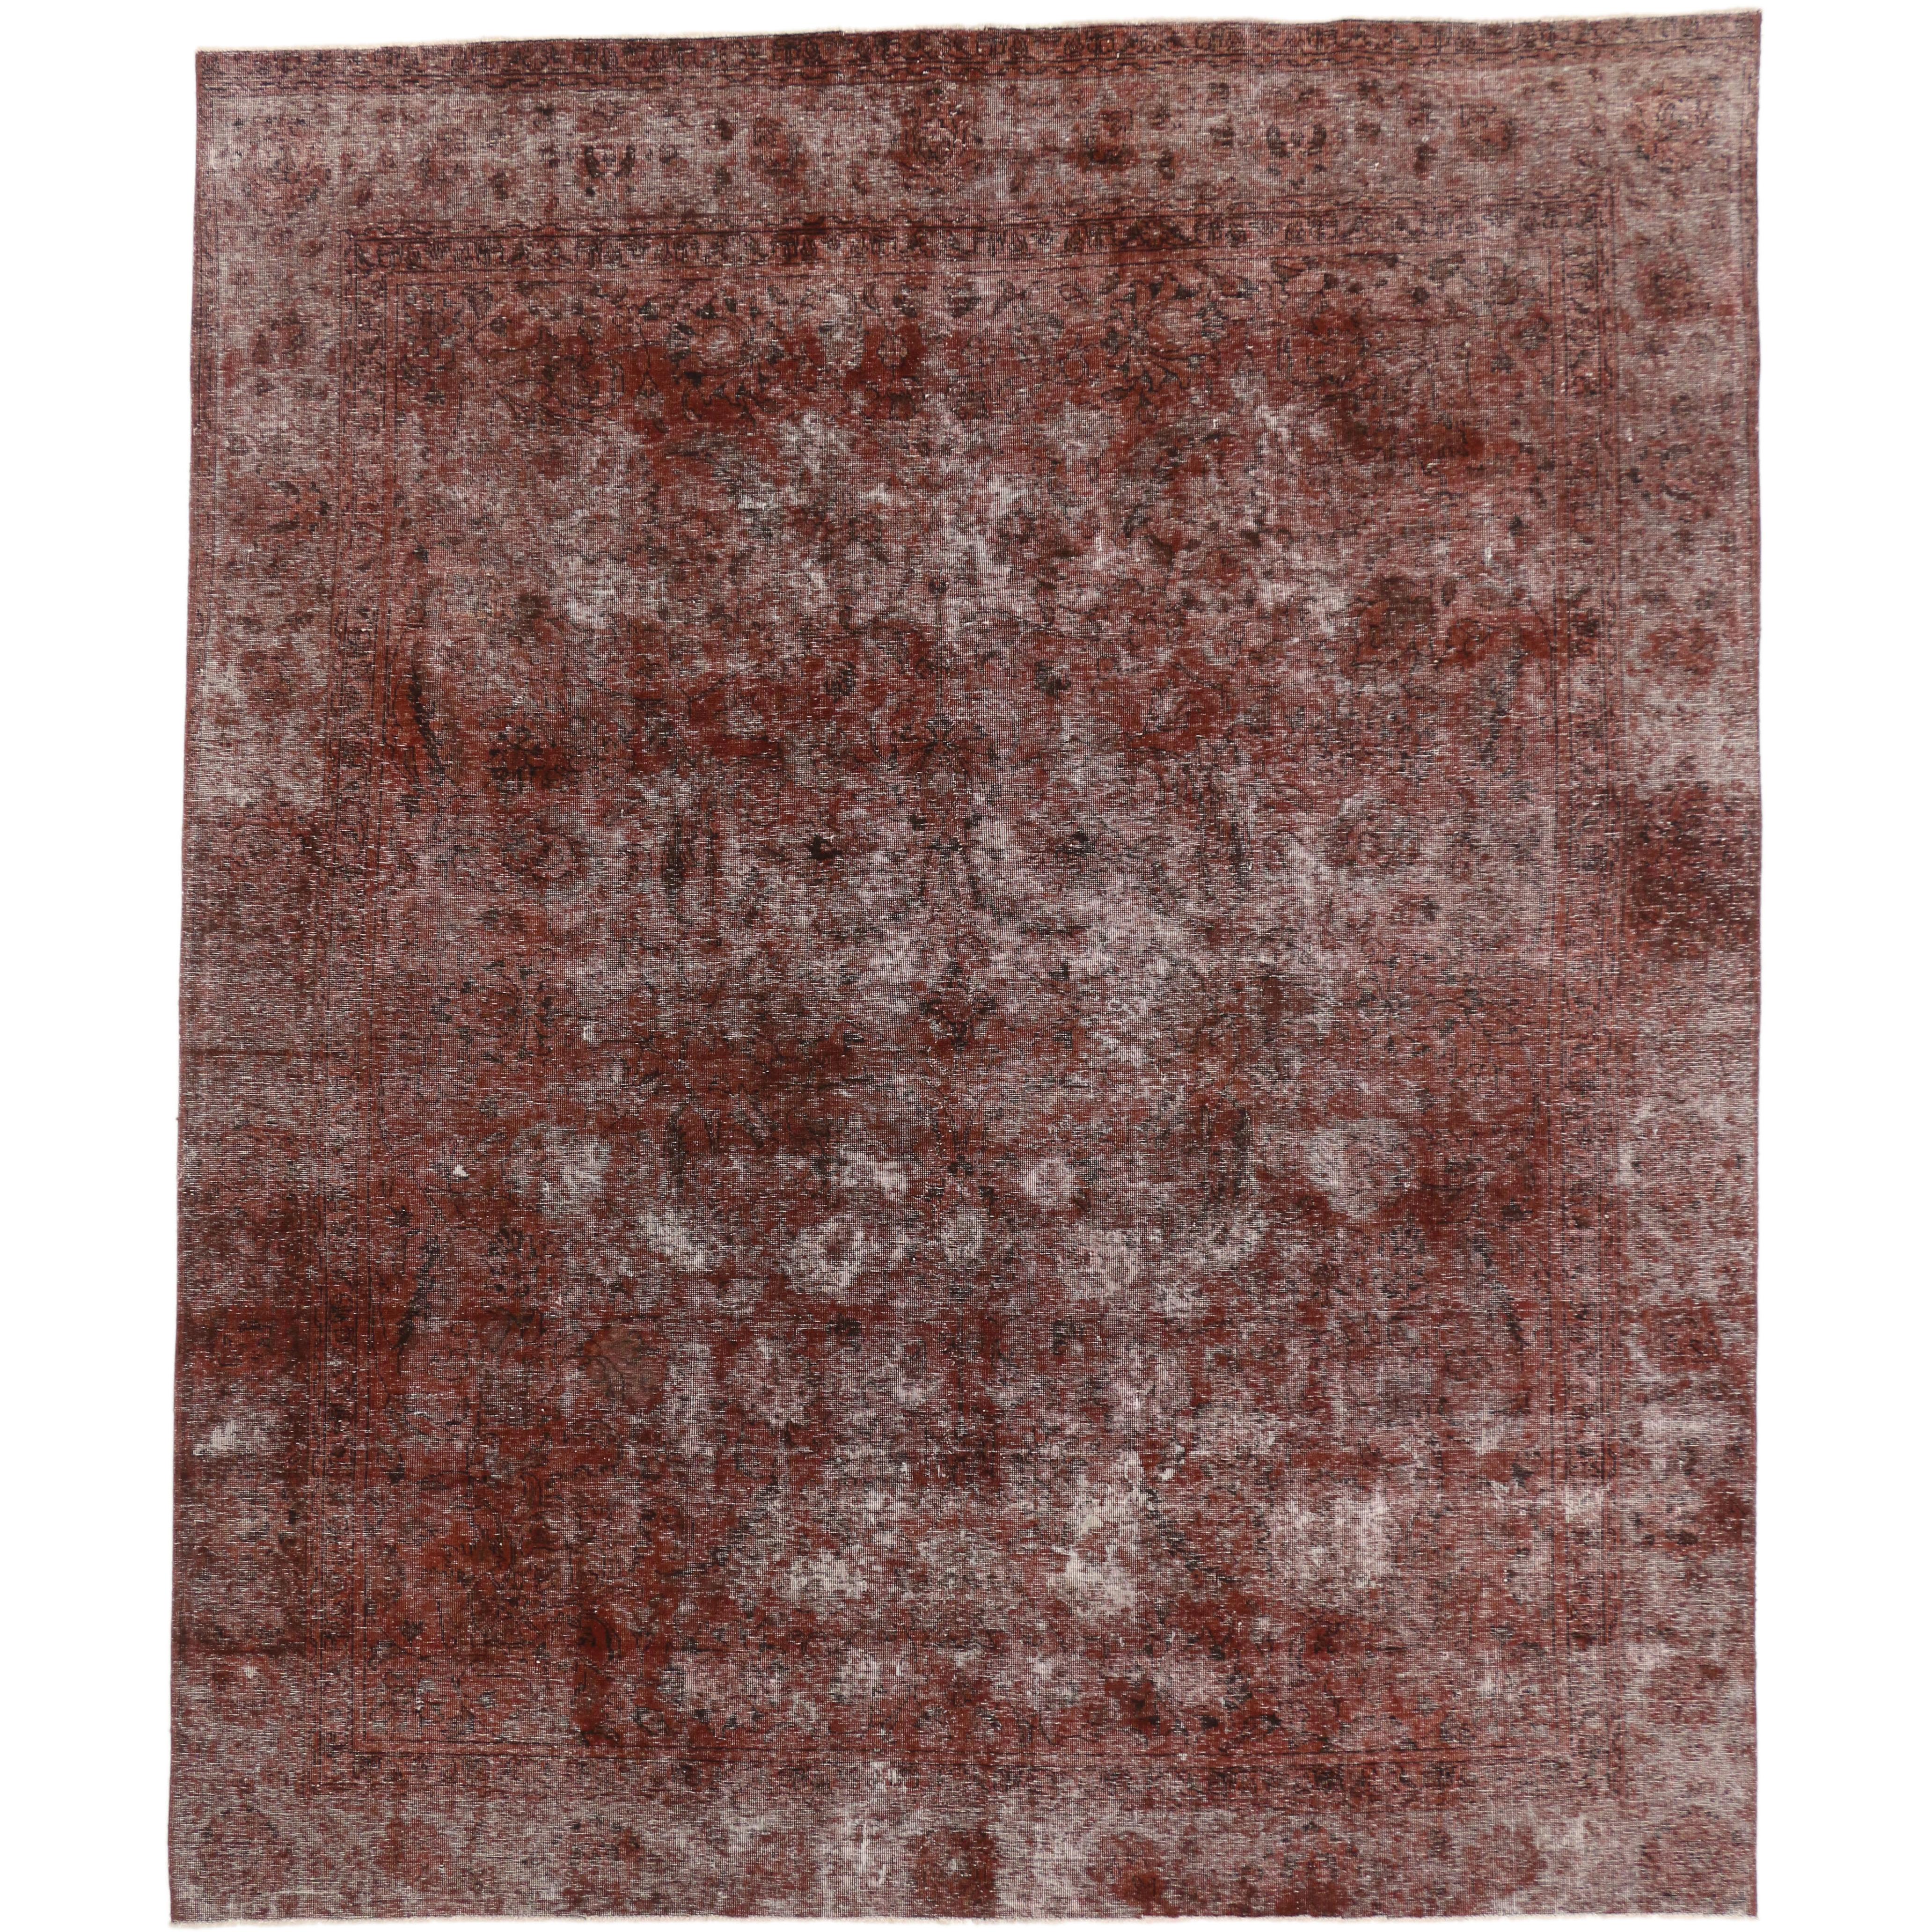 Vintage Turkish Overdyed Rug, Modern Industrial Meets Rustic Spanish Style For Sale